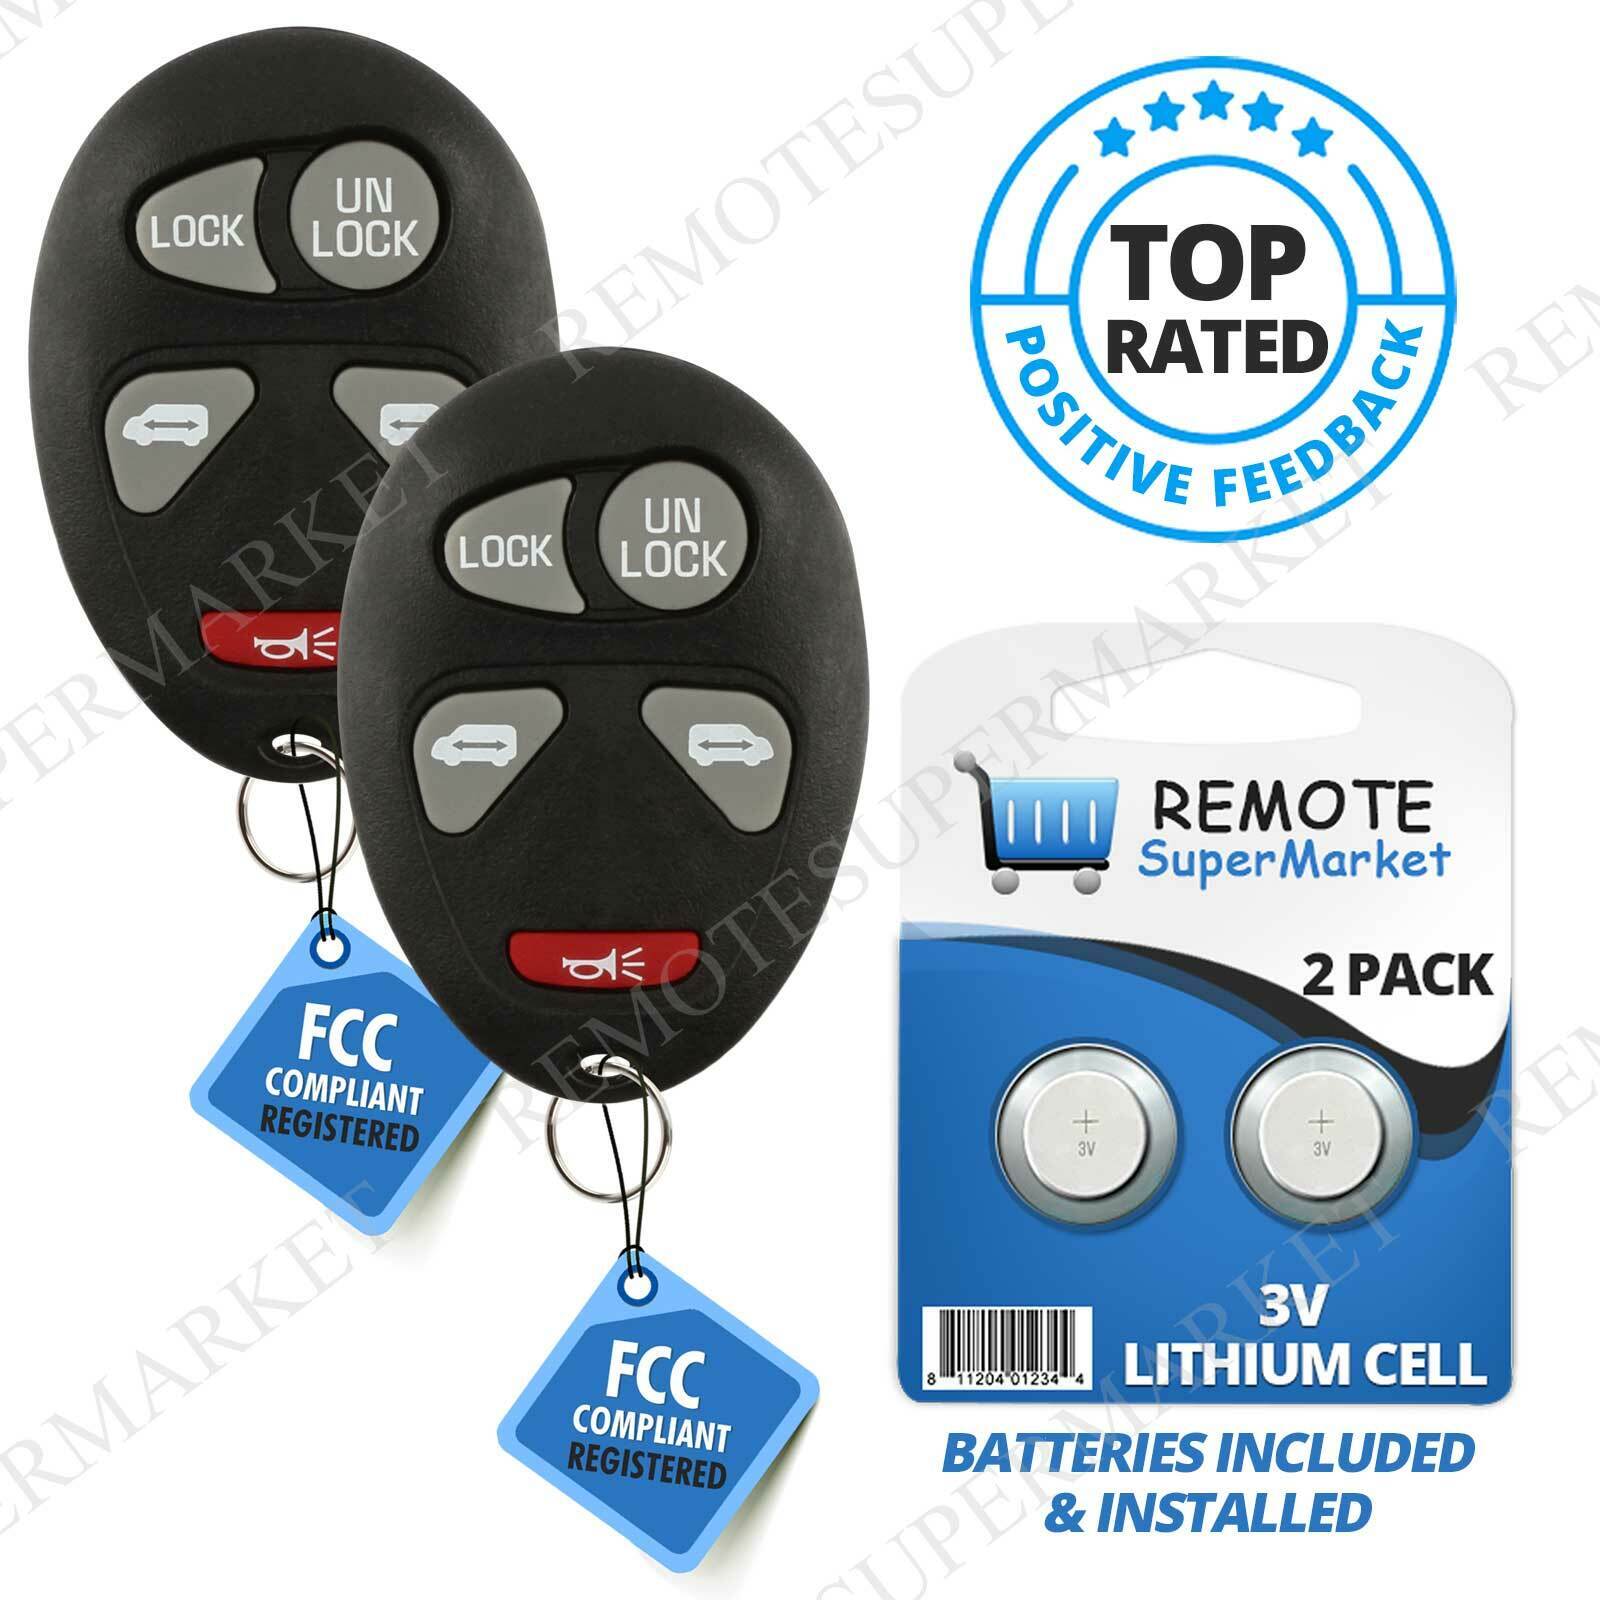 Replacement for 01-05 Chevy Venture Silhouette Montana Remote Dual Key Fob Pair